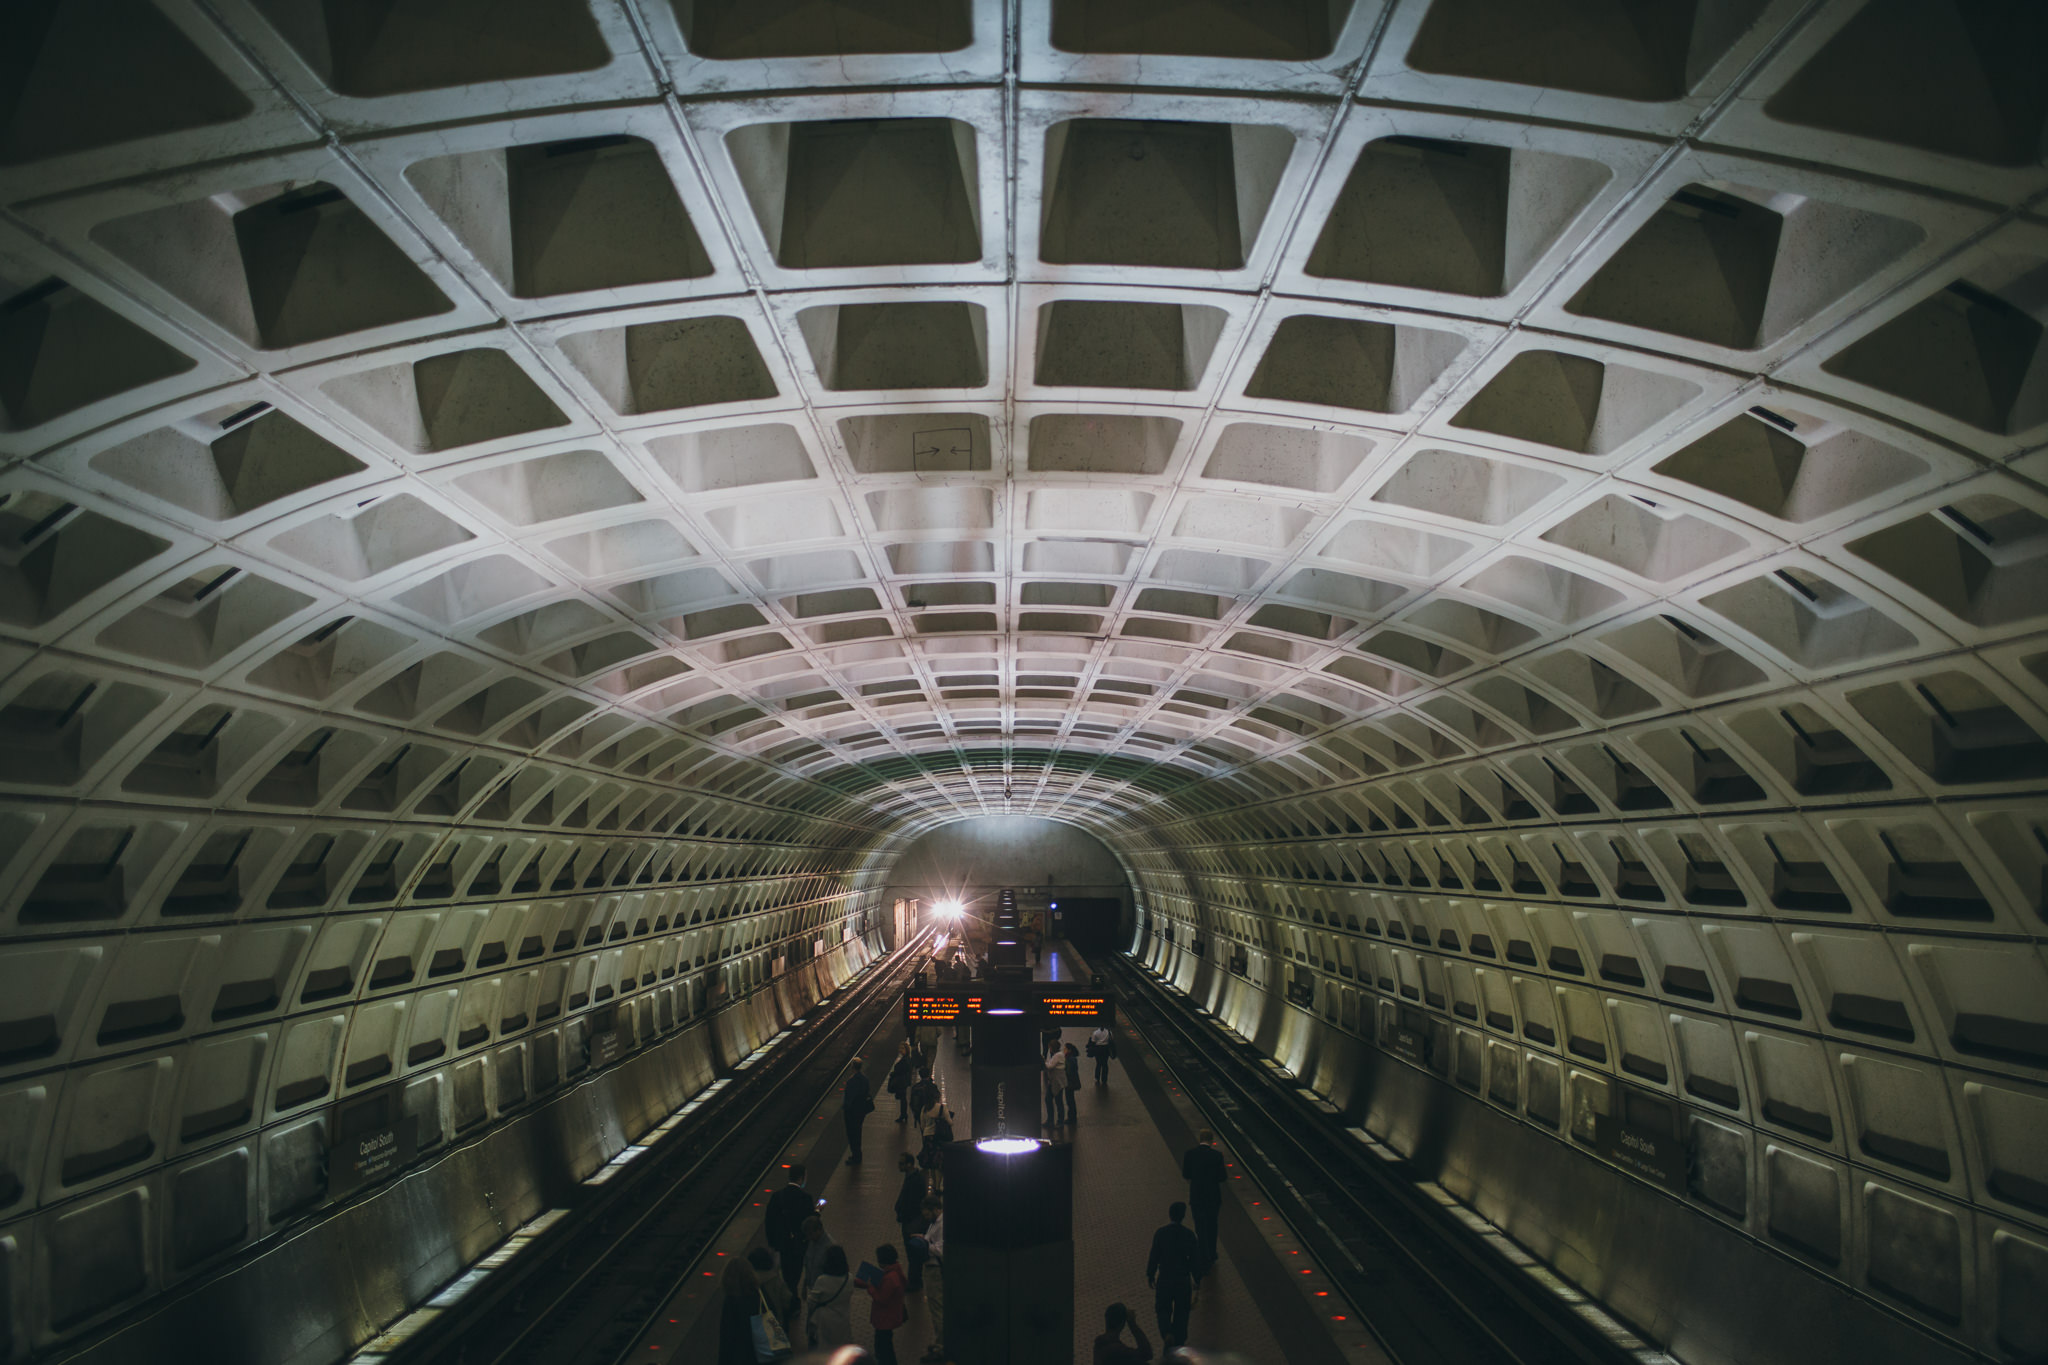 A train pulling into an underground station in Washington D.C.